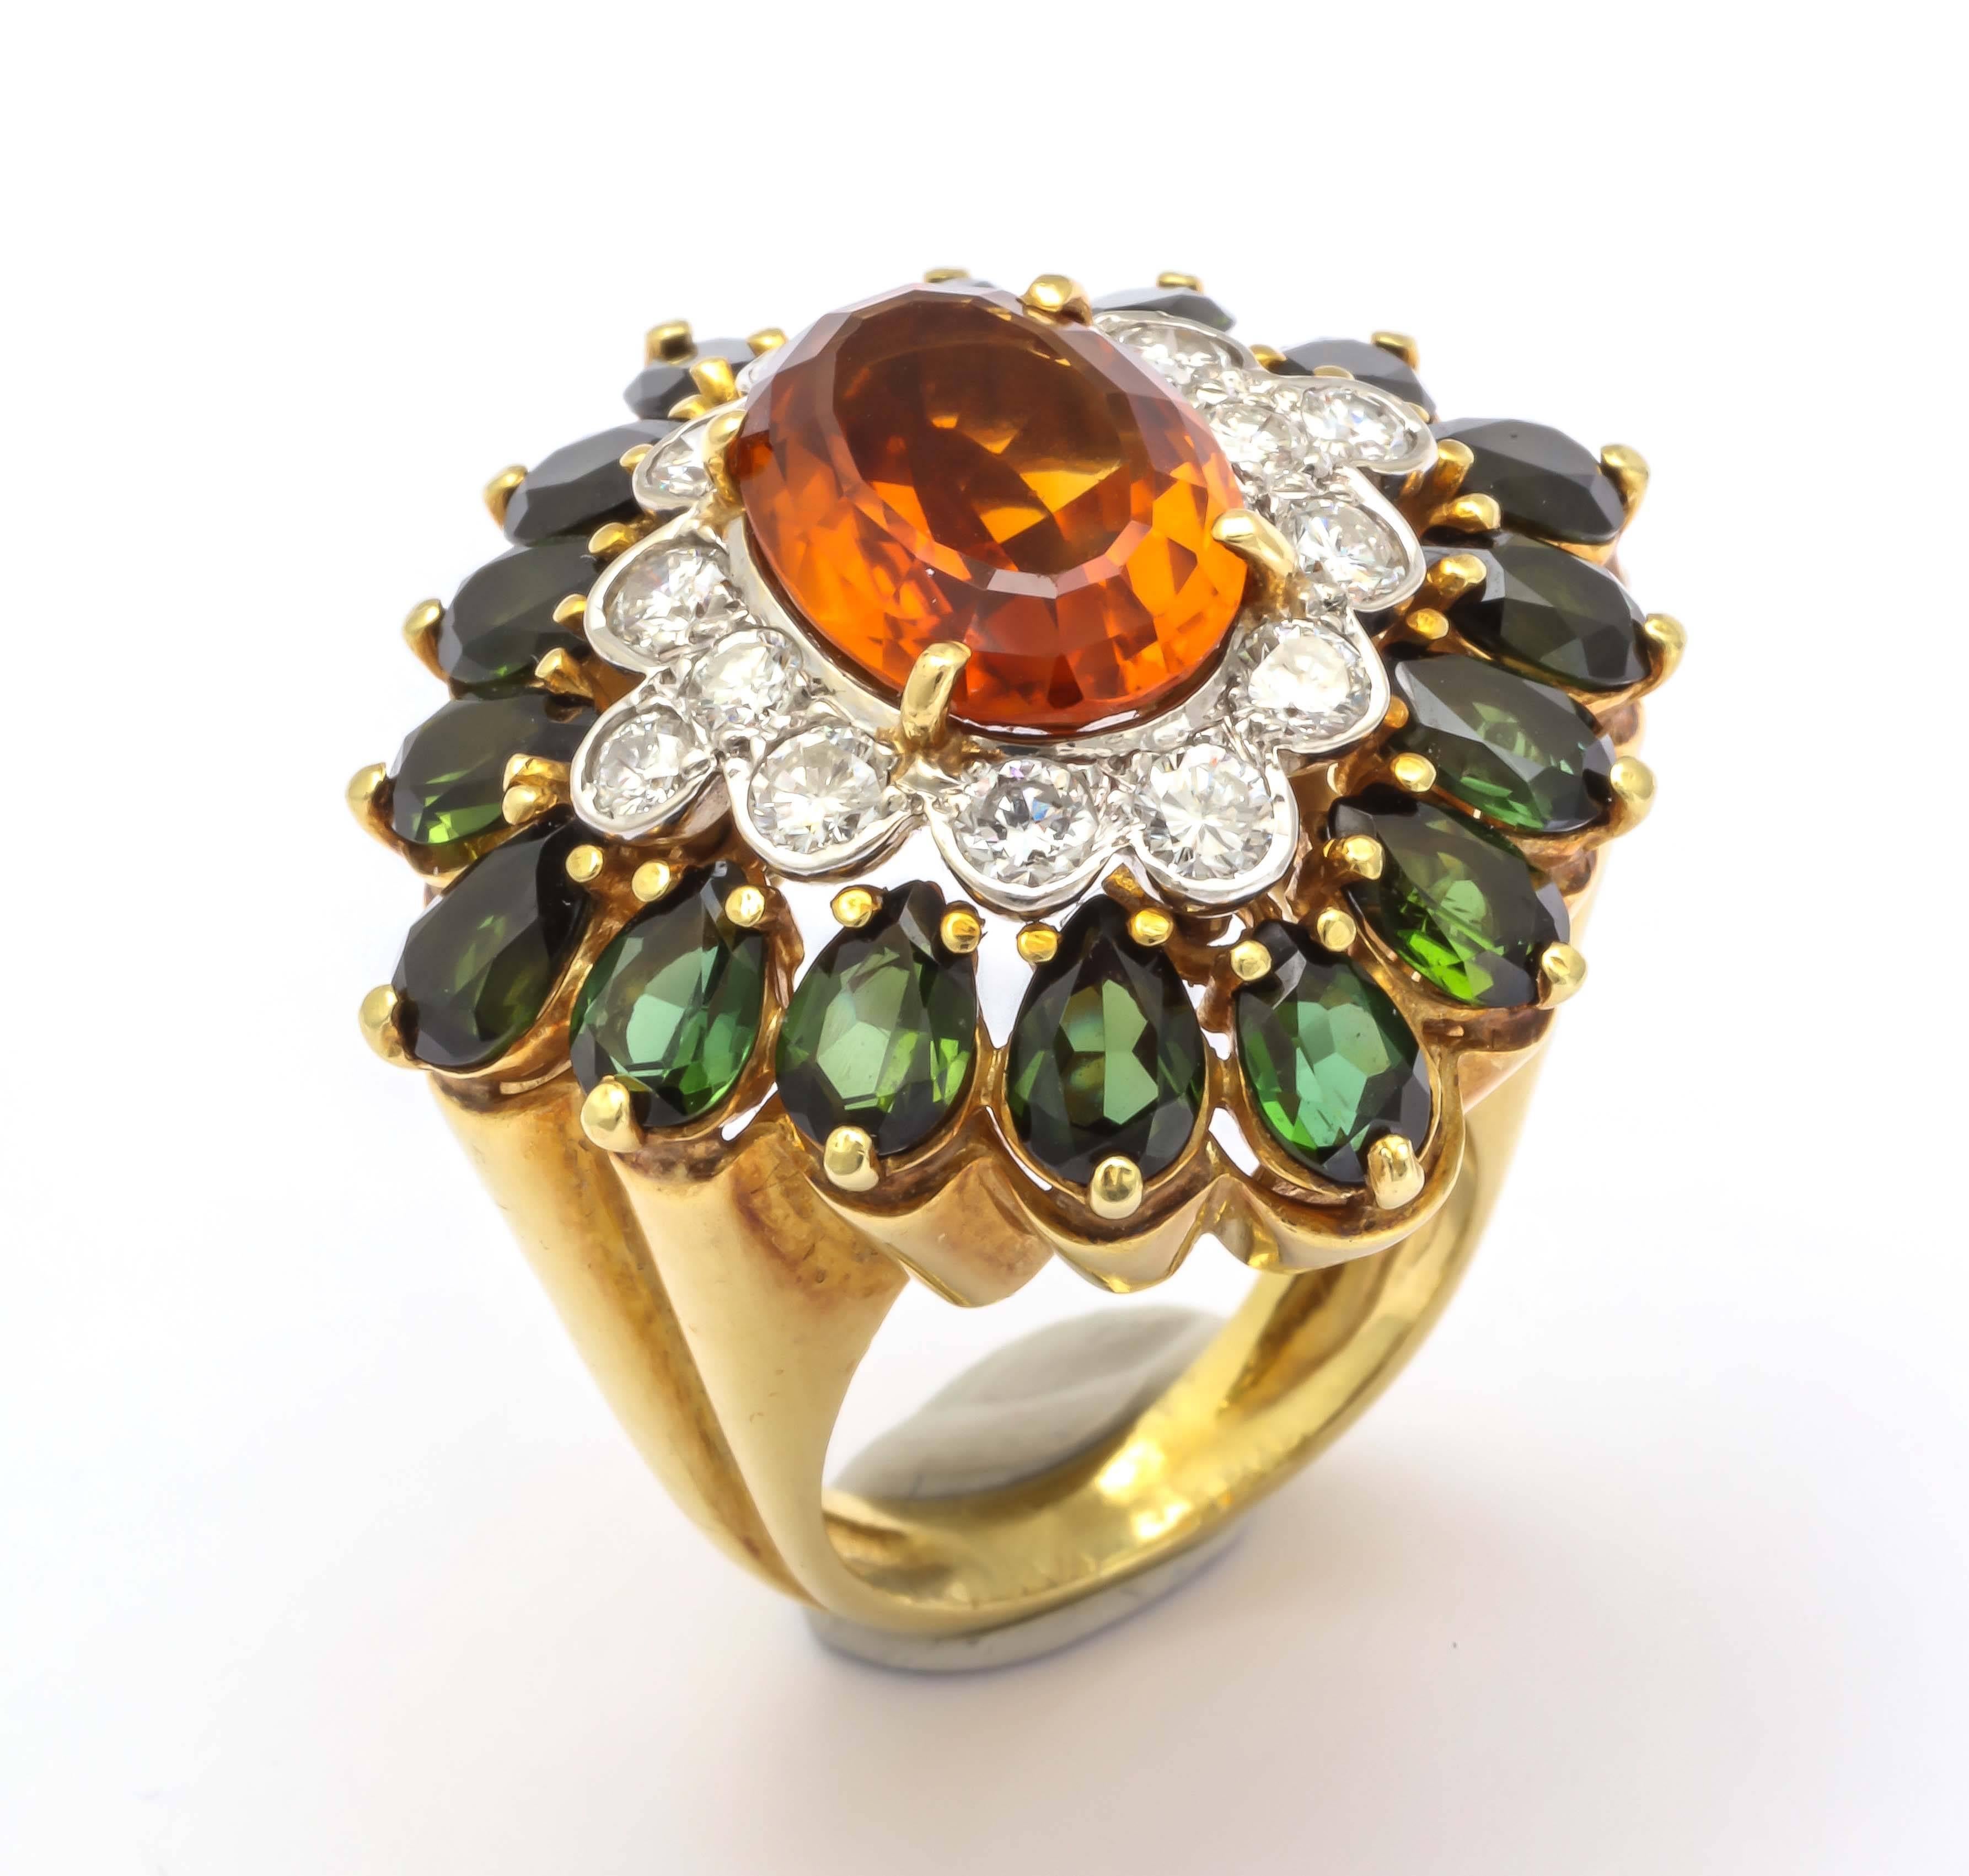 Sumptuous Dinner Ring - Green Tourmaline with Center Citrine and Diamond Ring - Prong set - and beautiful constructed.  